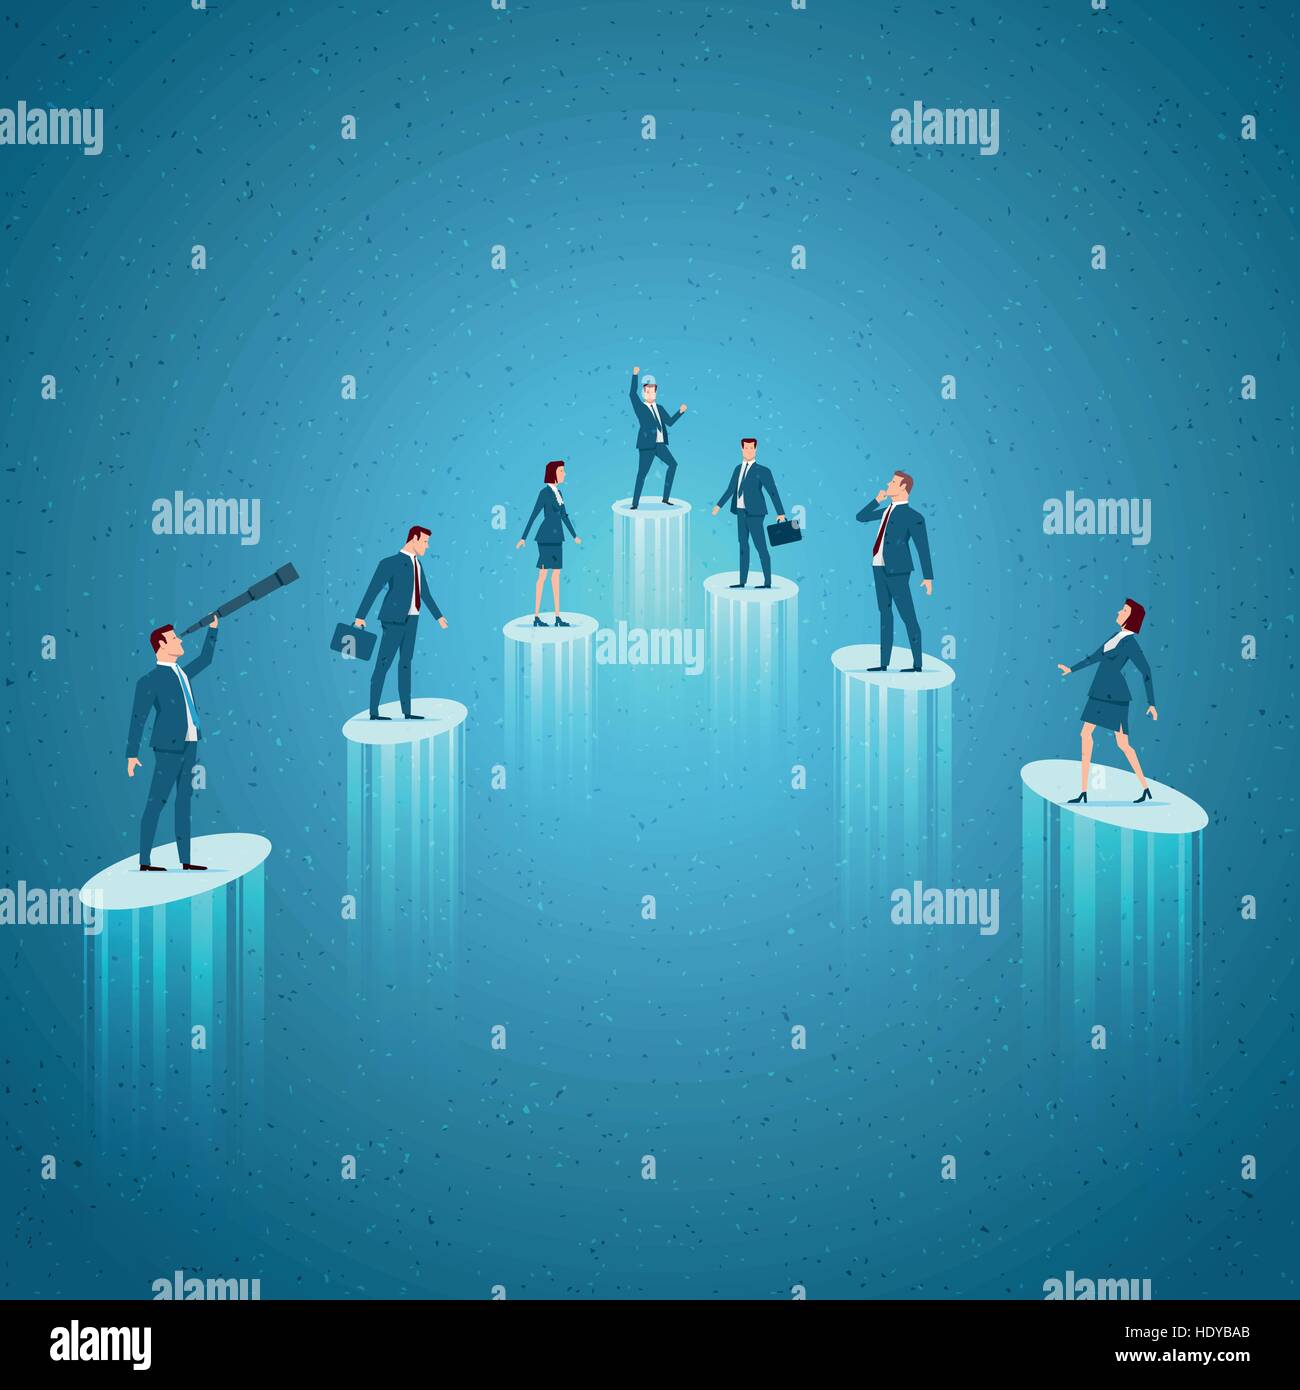 Business concept vector illustration. Growth, rising, success, win, business opportunities concept. Elements are layered separately in vector file. Stock Vector